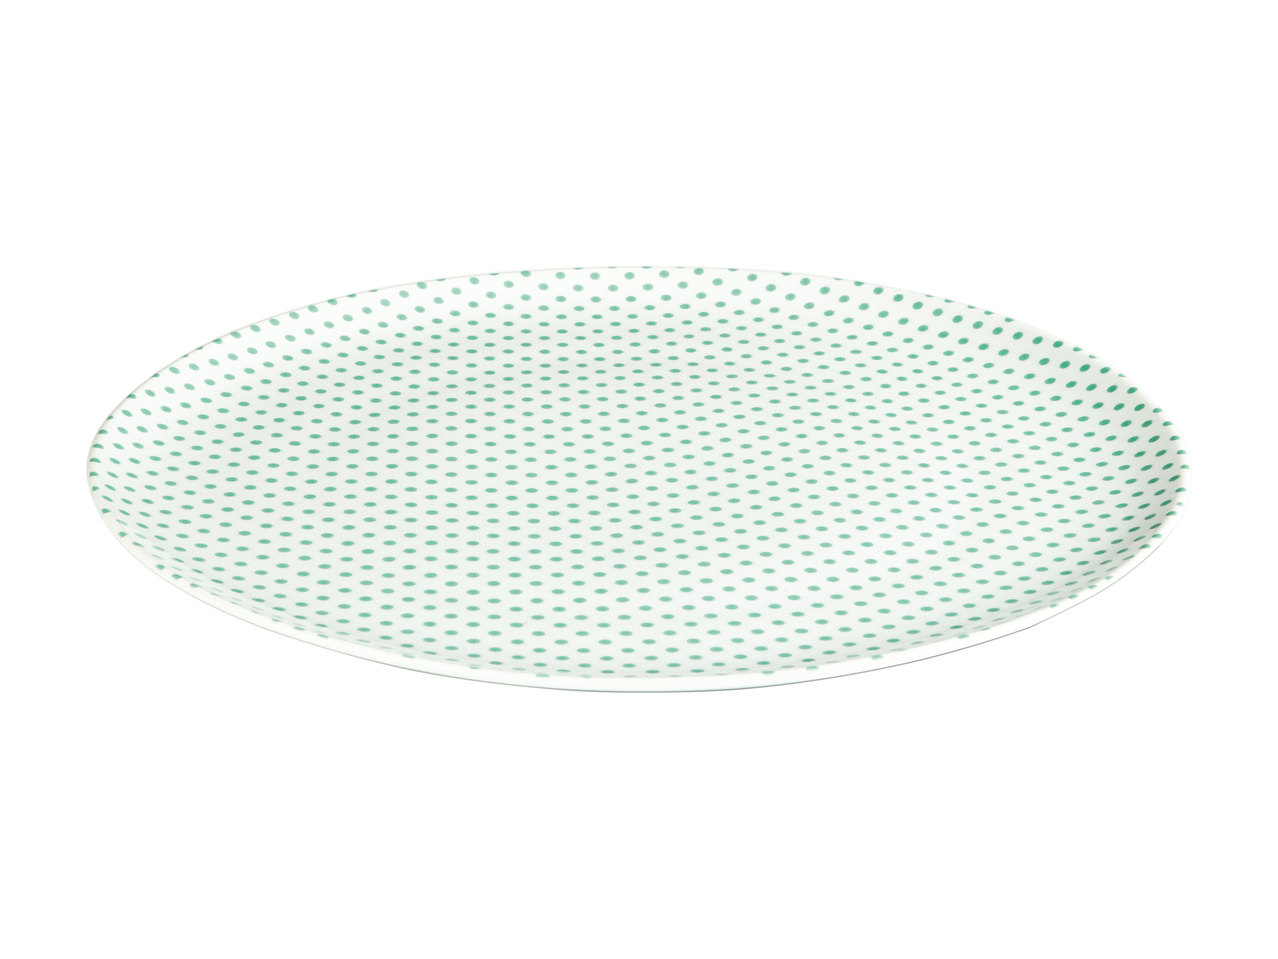 Ernesto Cake Stand or Plate1